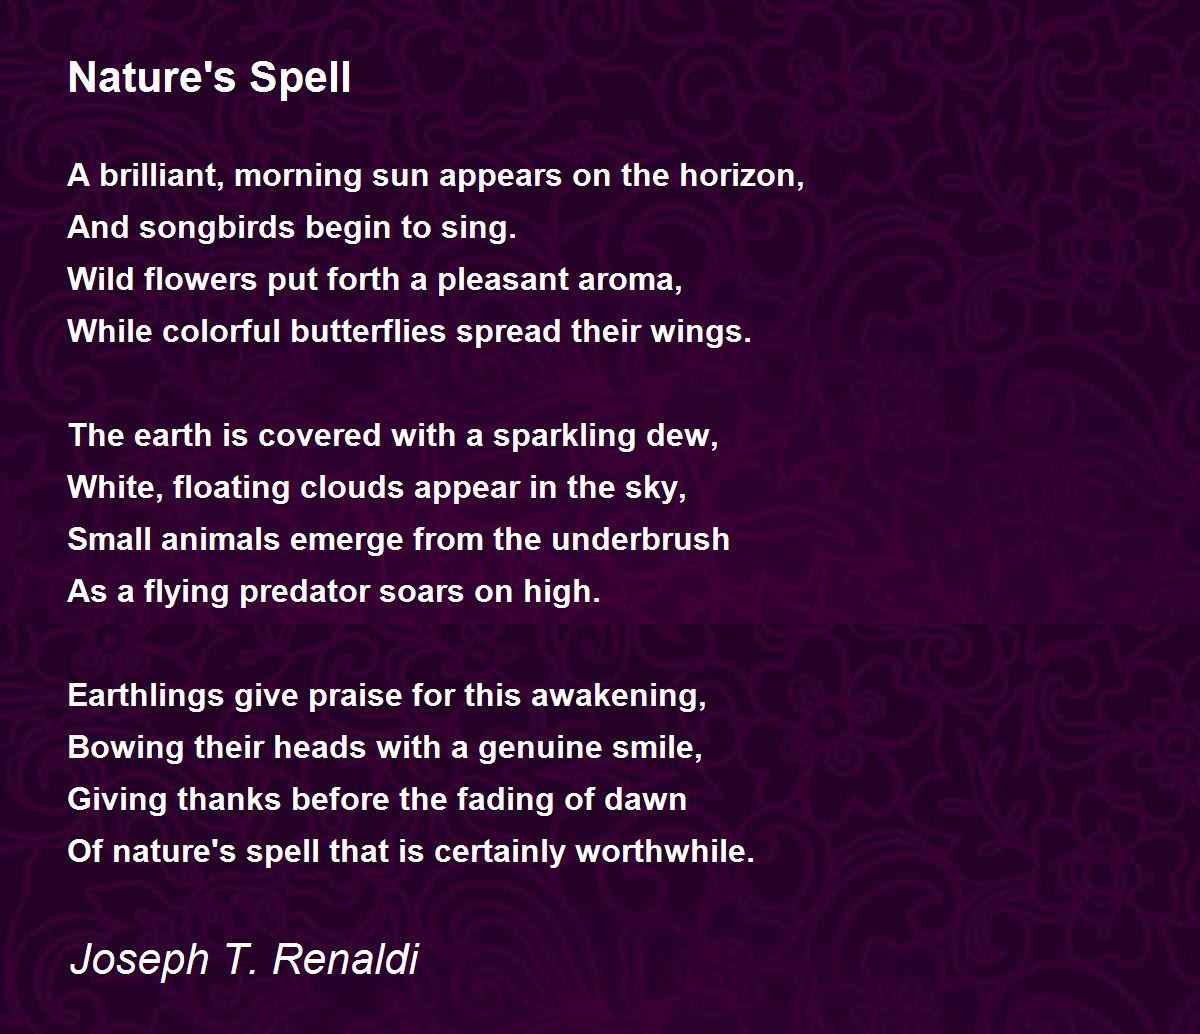 Nature's Spell - Nature's Spell Poem by Joseph T. Renaldi